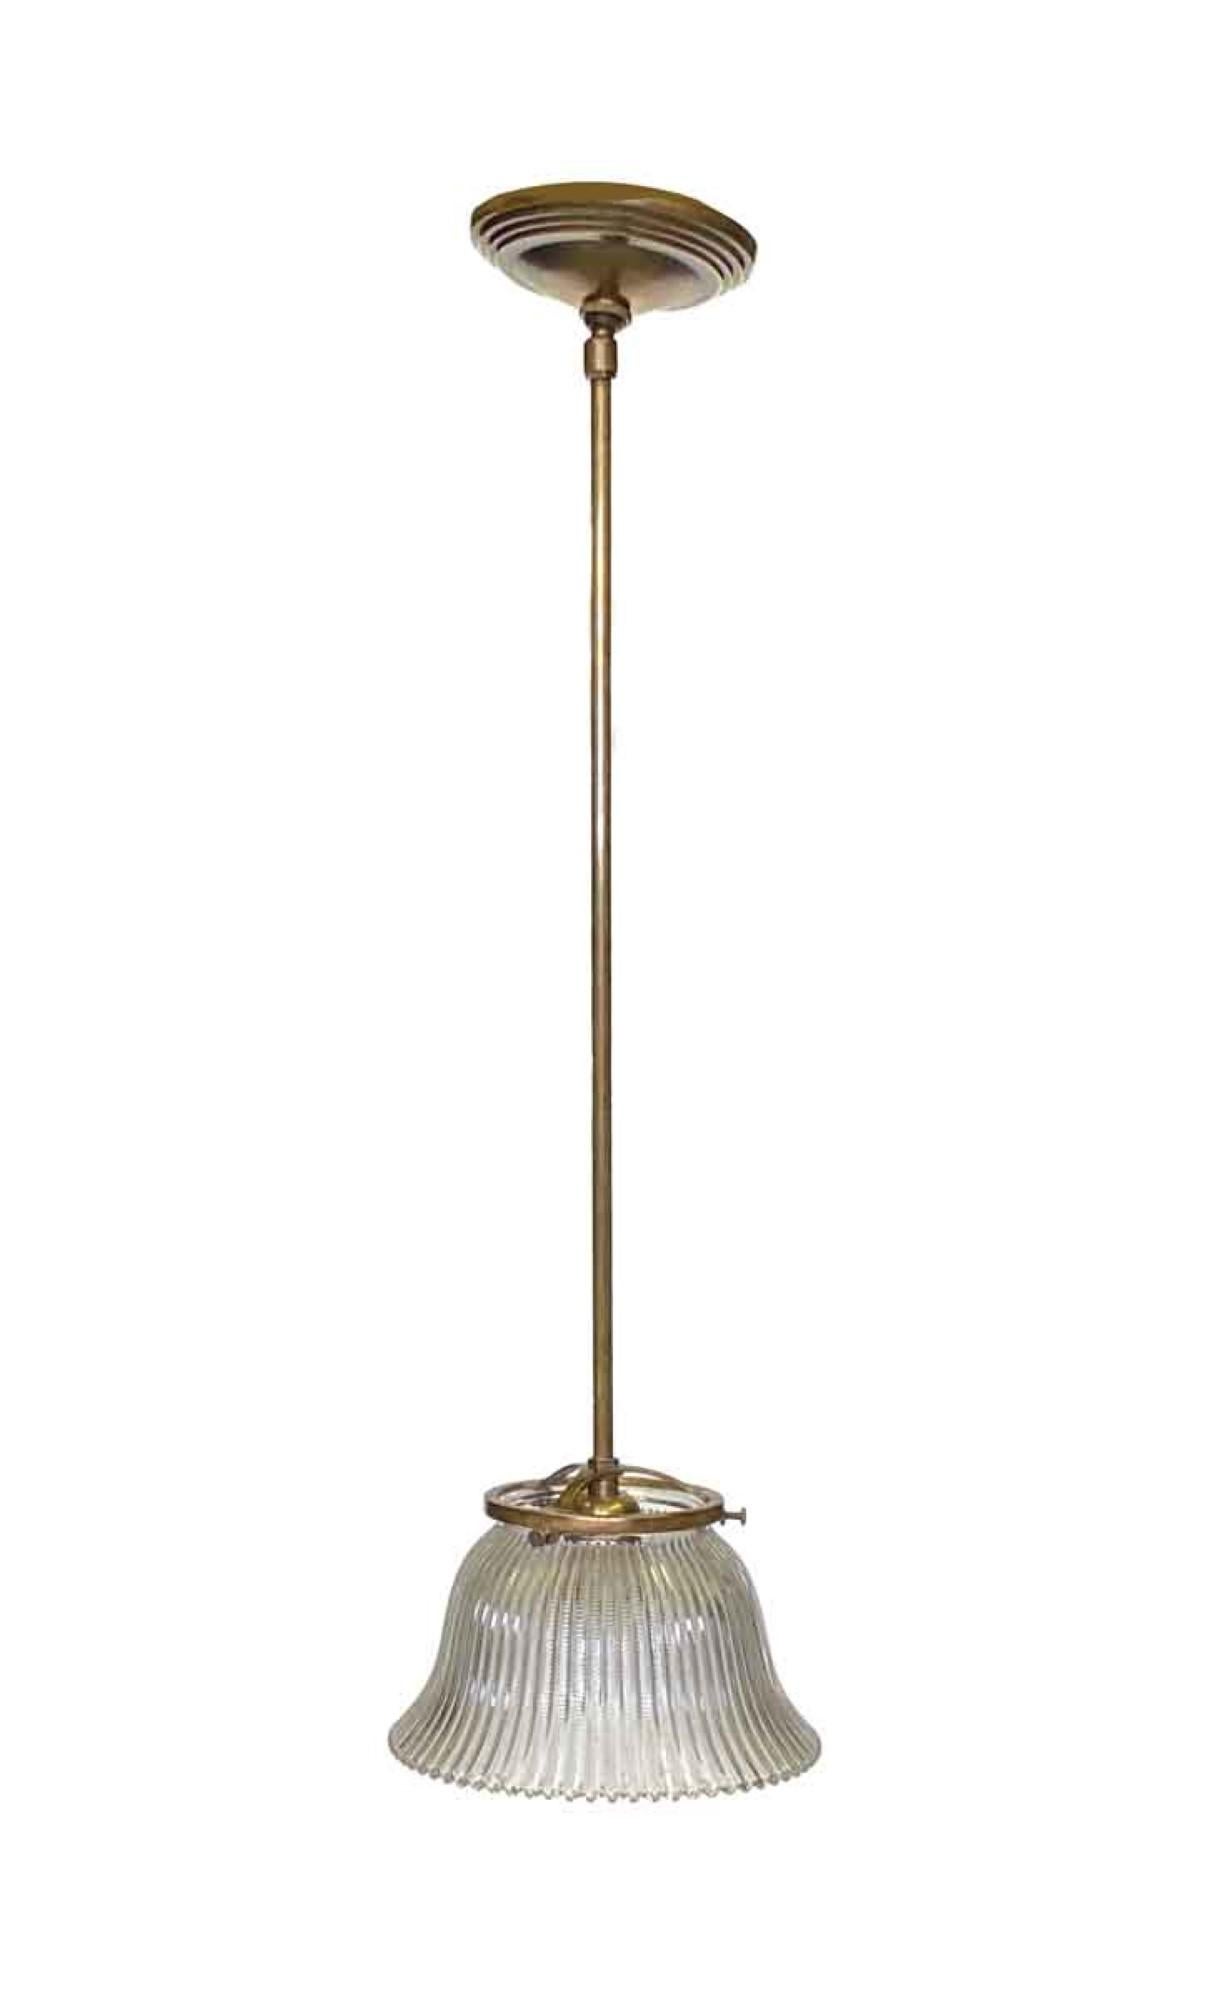 1910 Holophane glass shade used in gas lanterns that has been retrofitted to become a pendant ceiling light. Can be fitted with a brass fixture as pictured, or brushed steel. Small quantity available at time of posting. Priced each. Please inquire.